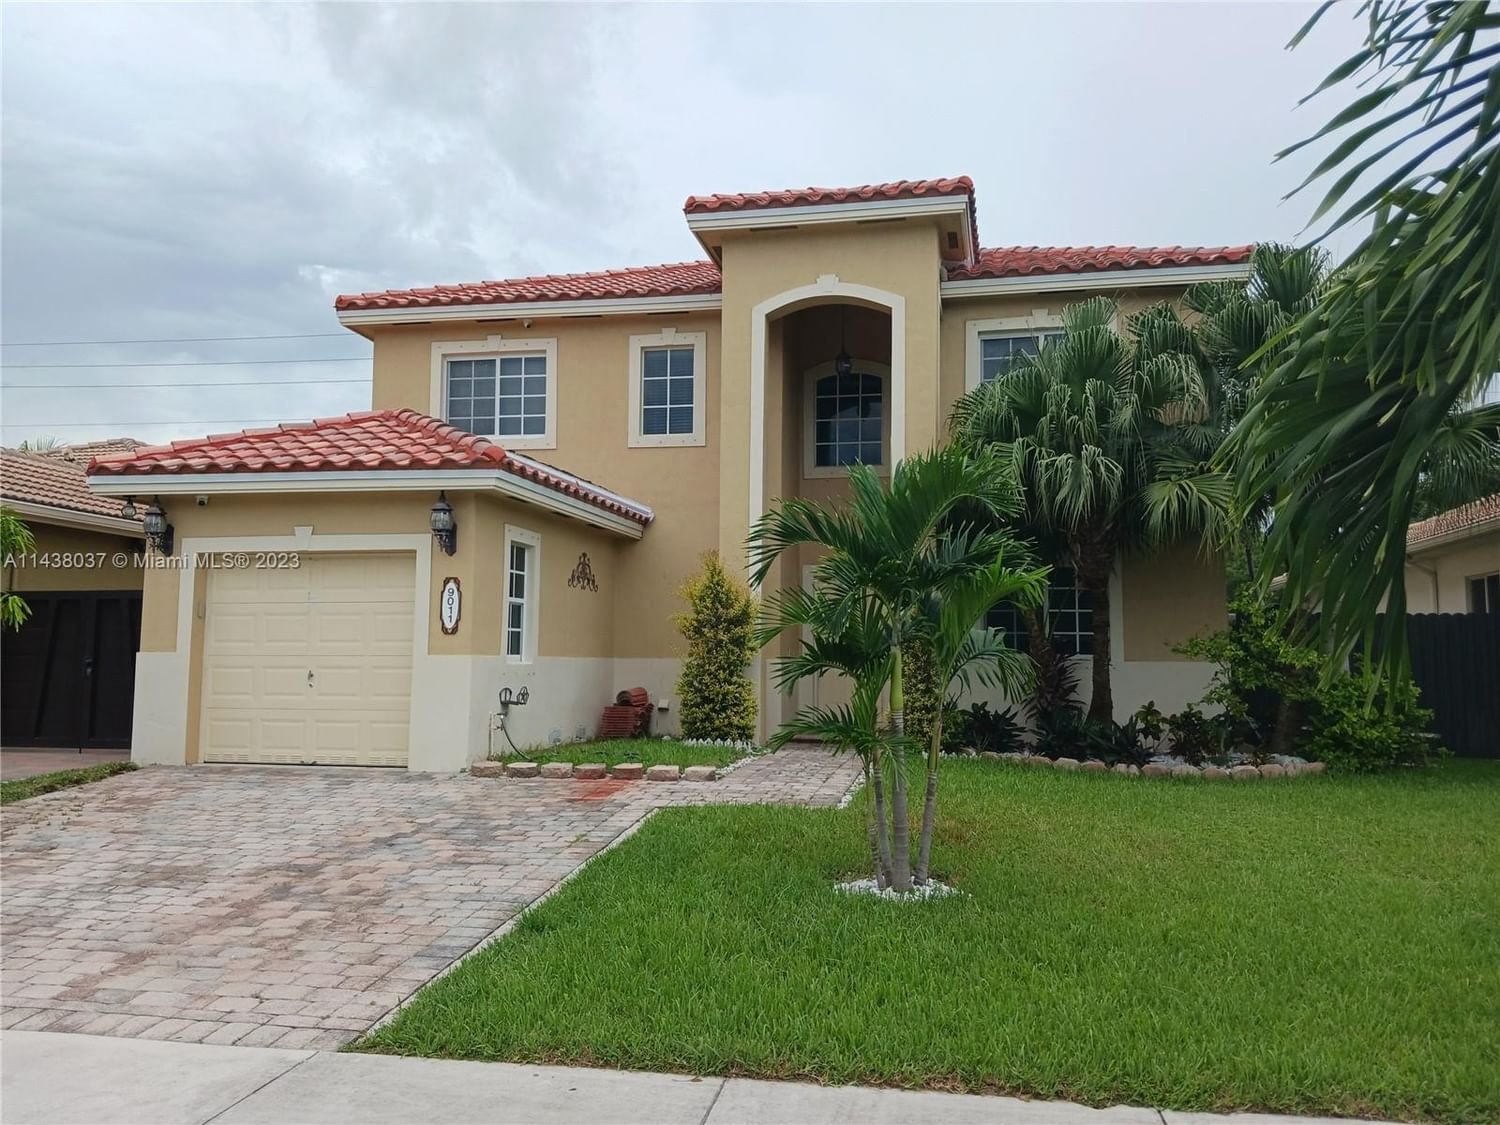 Real estate property located at 9011 208th Ter, Miami-Dade County, Cutler Bay, FL